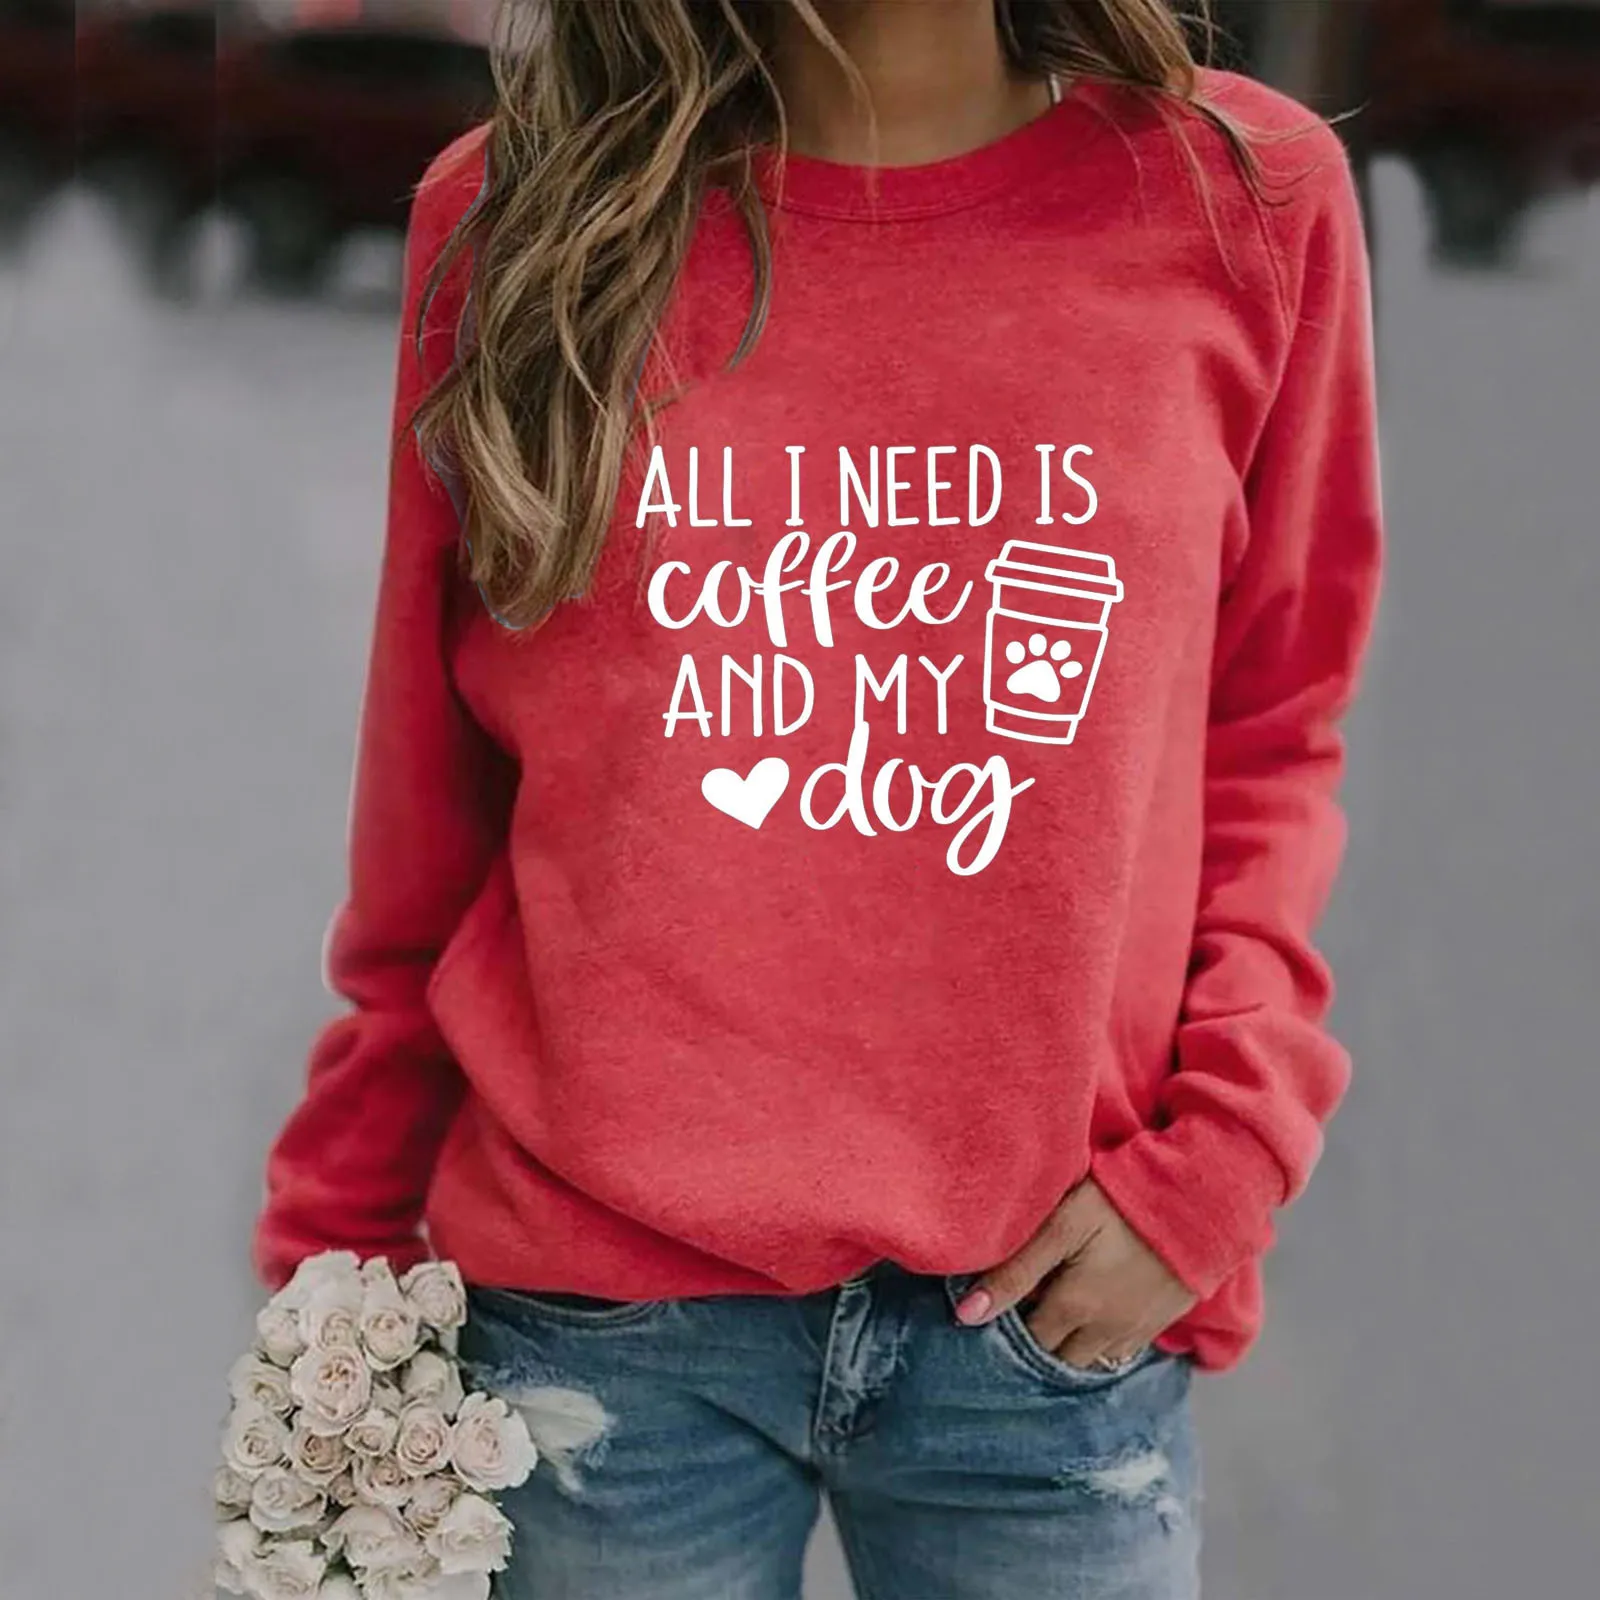 

Winter Clothes Femme All I Need Is Coffee and My Dogs Funny Words Saying Women Sweatshirt Long Sleeve Crewneck Graphic Hoodies